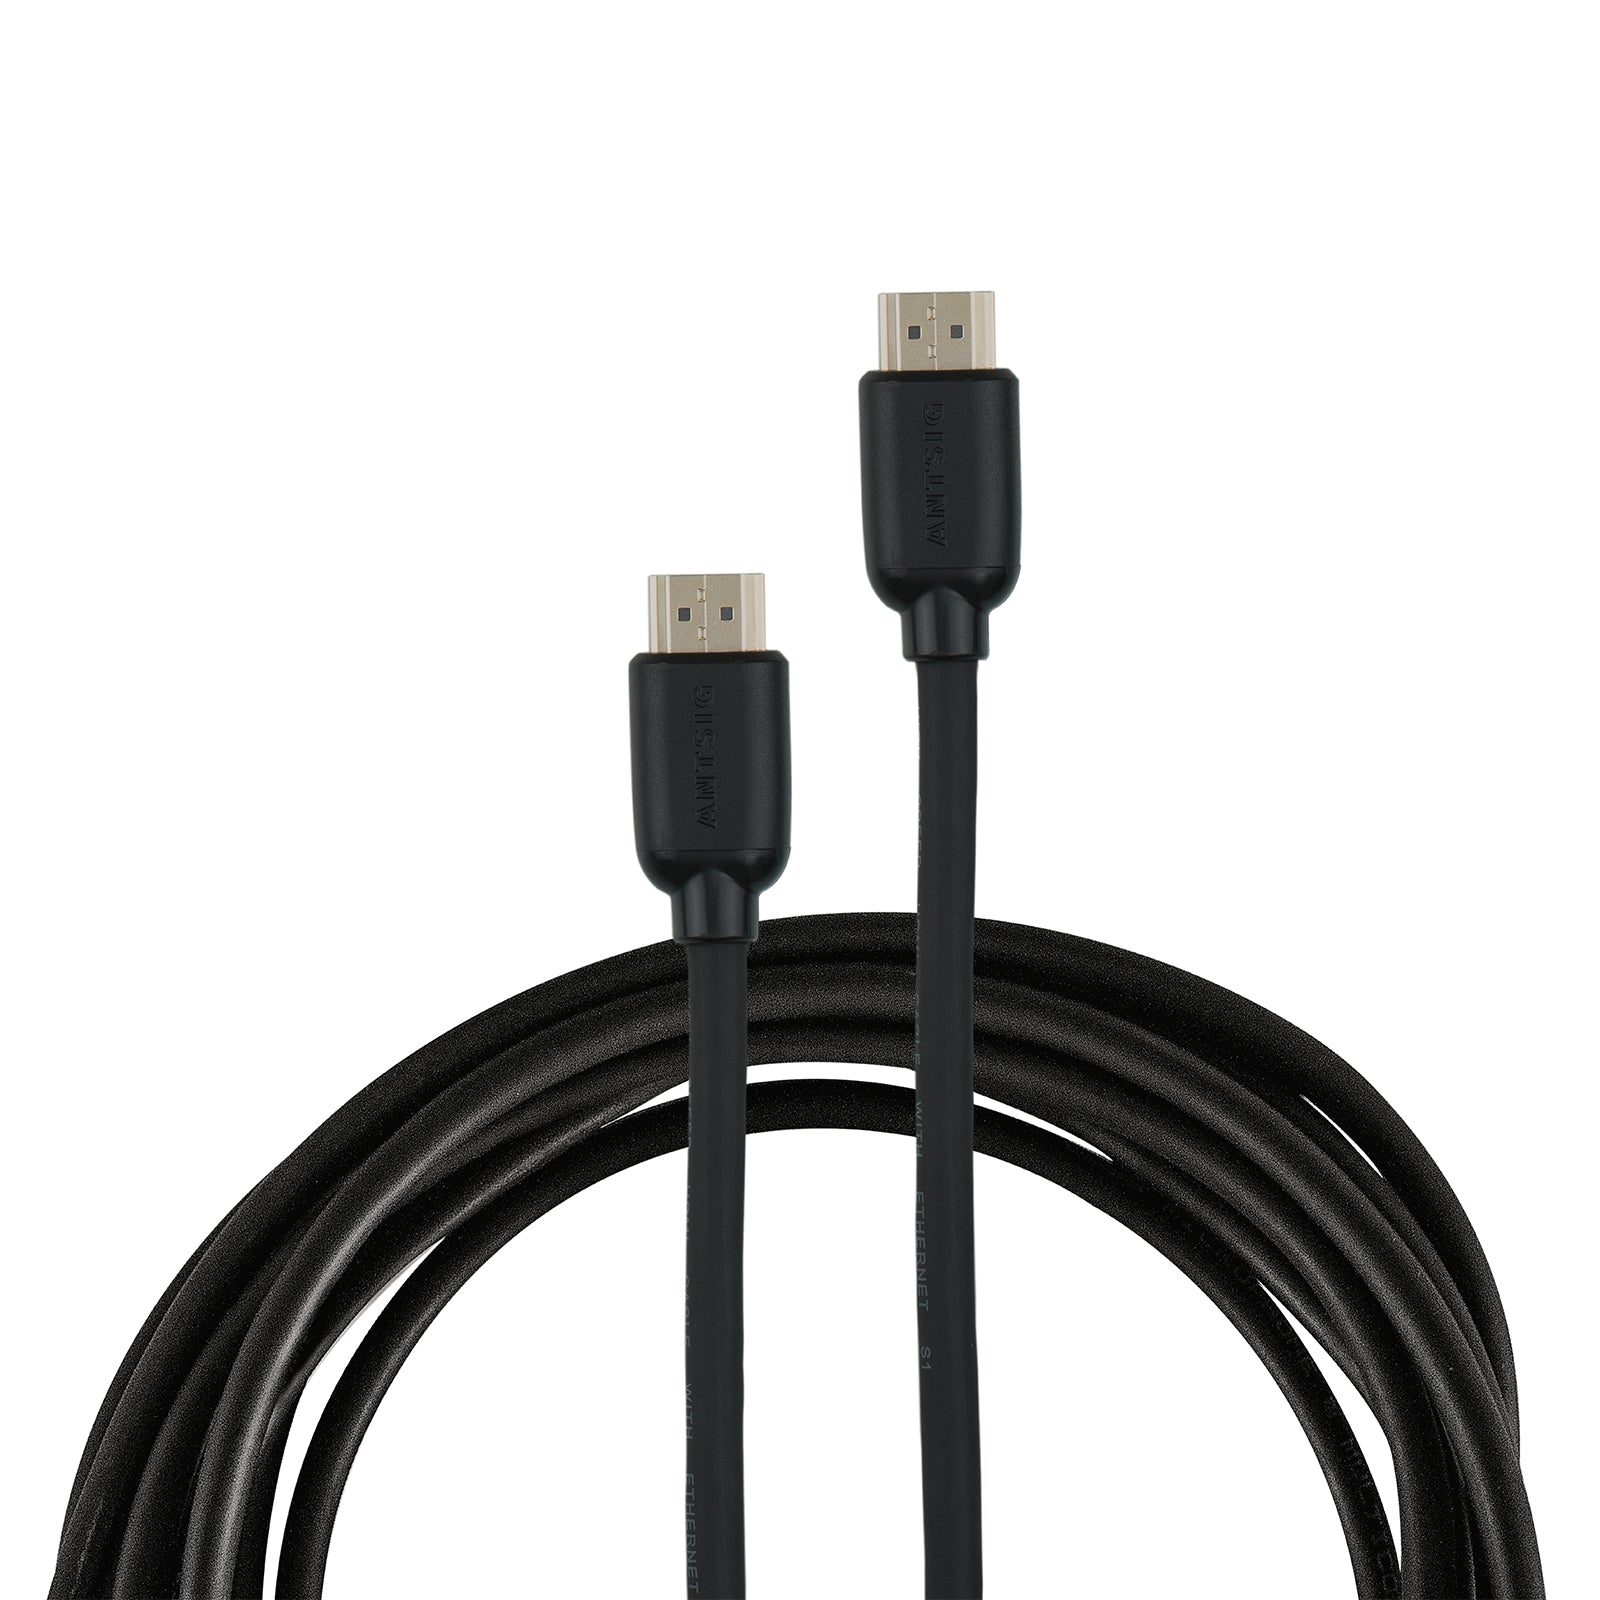 FrndzMart Hdmi Cable,hdmi cable for laptop to tv, Hdmi cable (3m, Black)